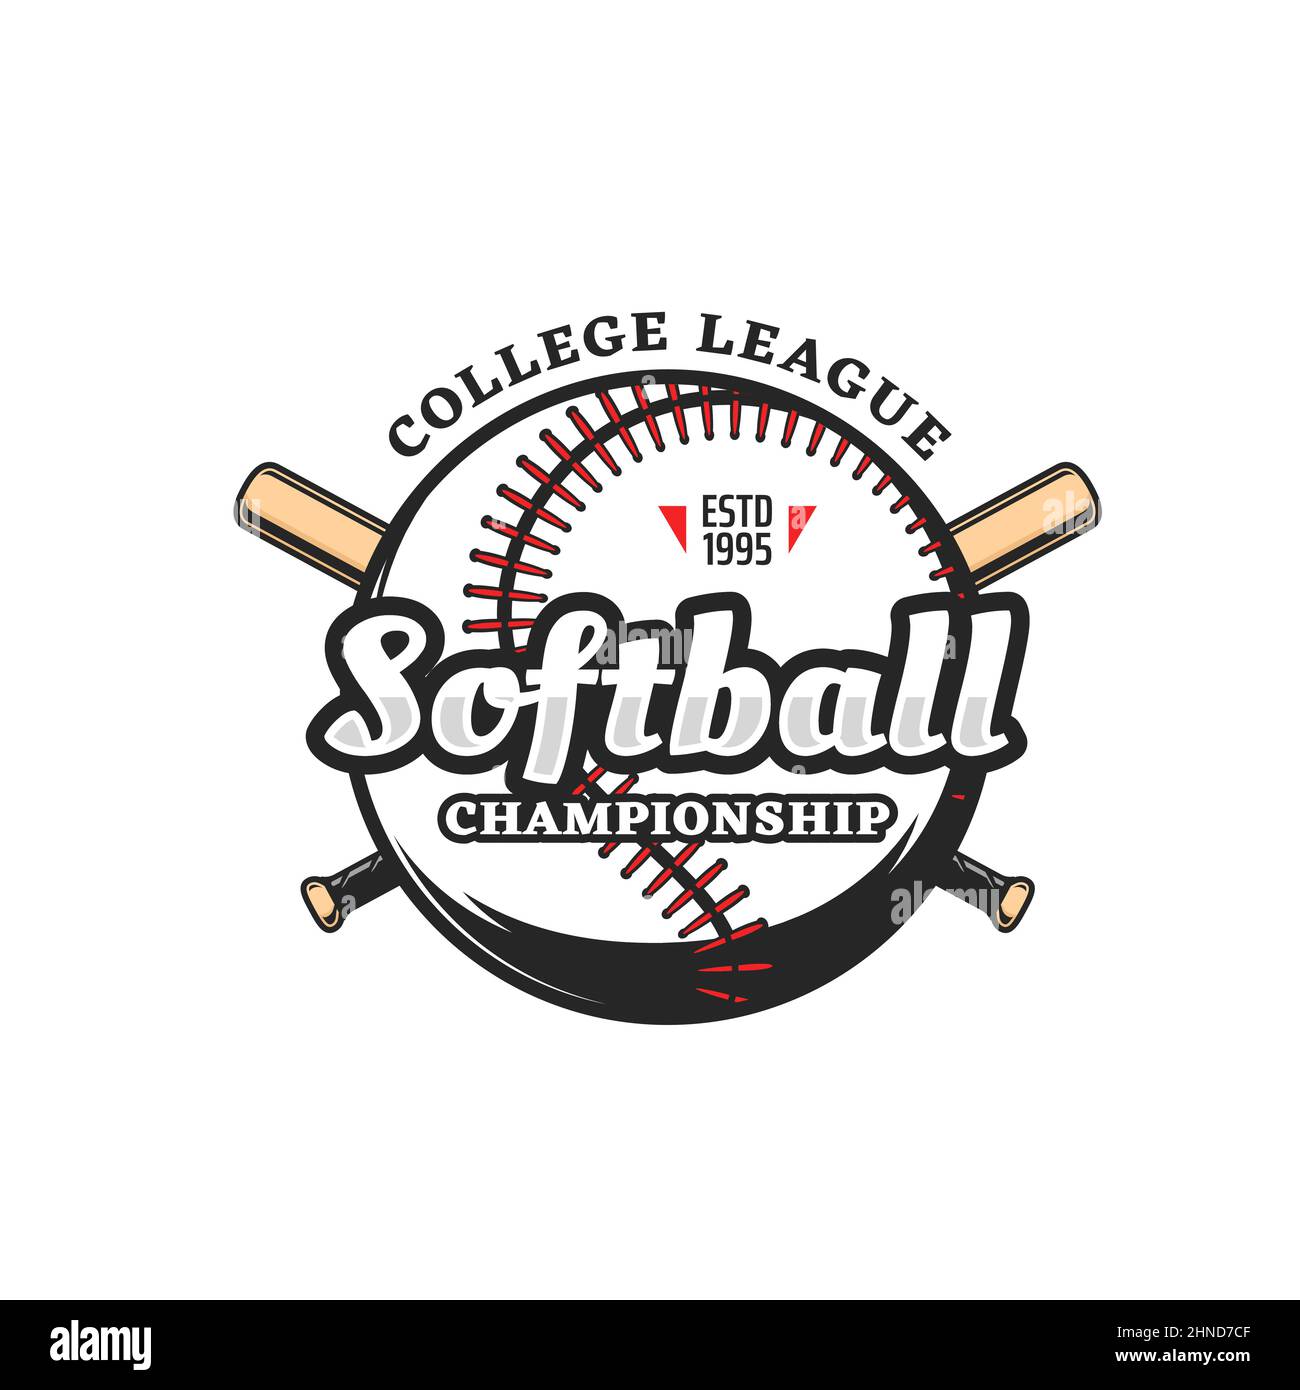 Softball sport icon of vector ball and crossed bats. Softball game team or championship league isolated symbol with pitcher, batter or hitter player s Stock Vector